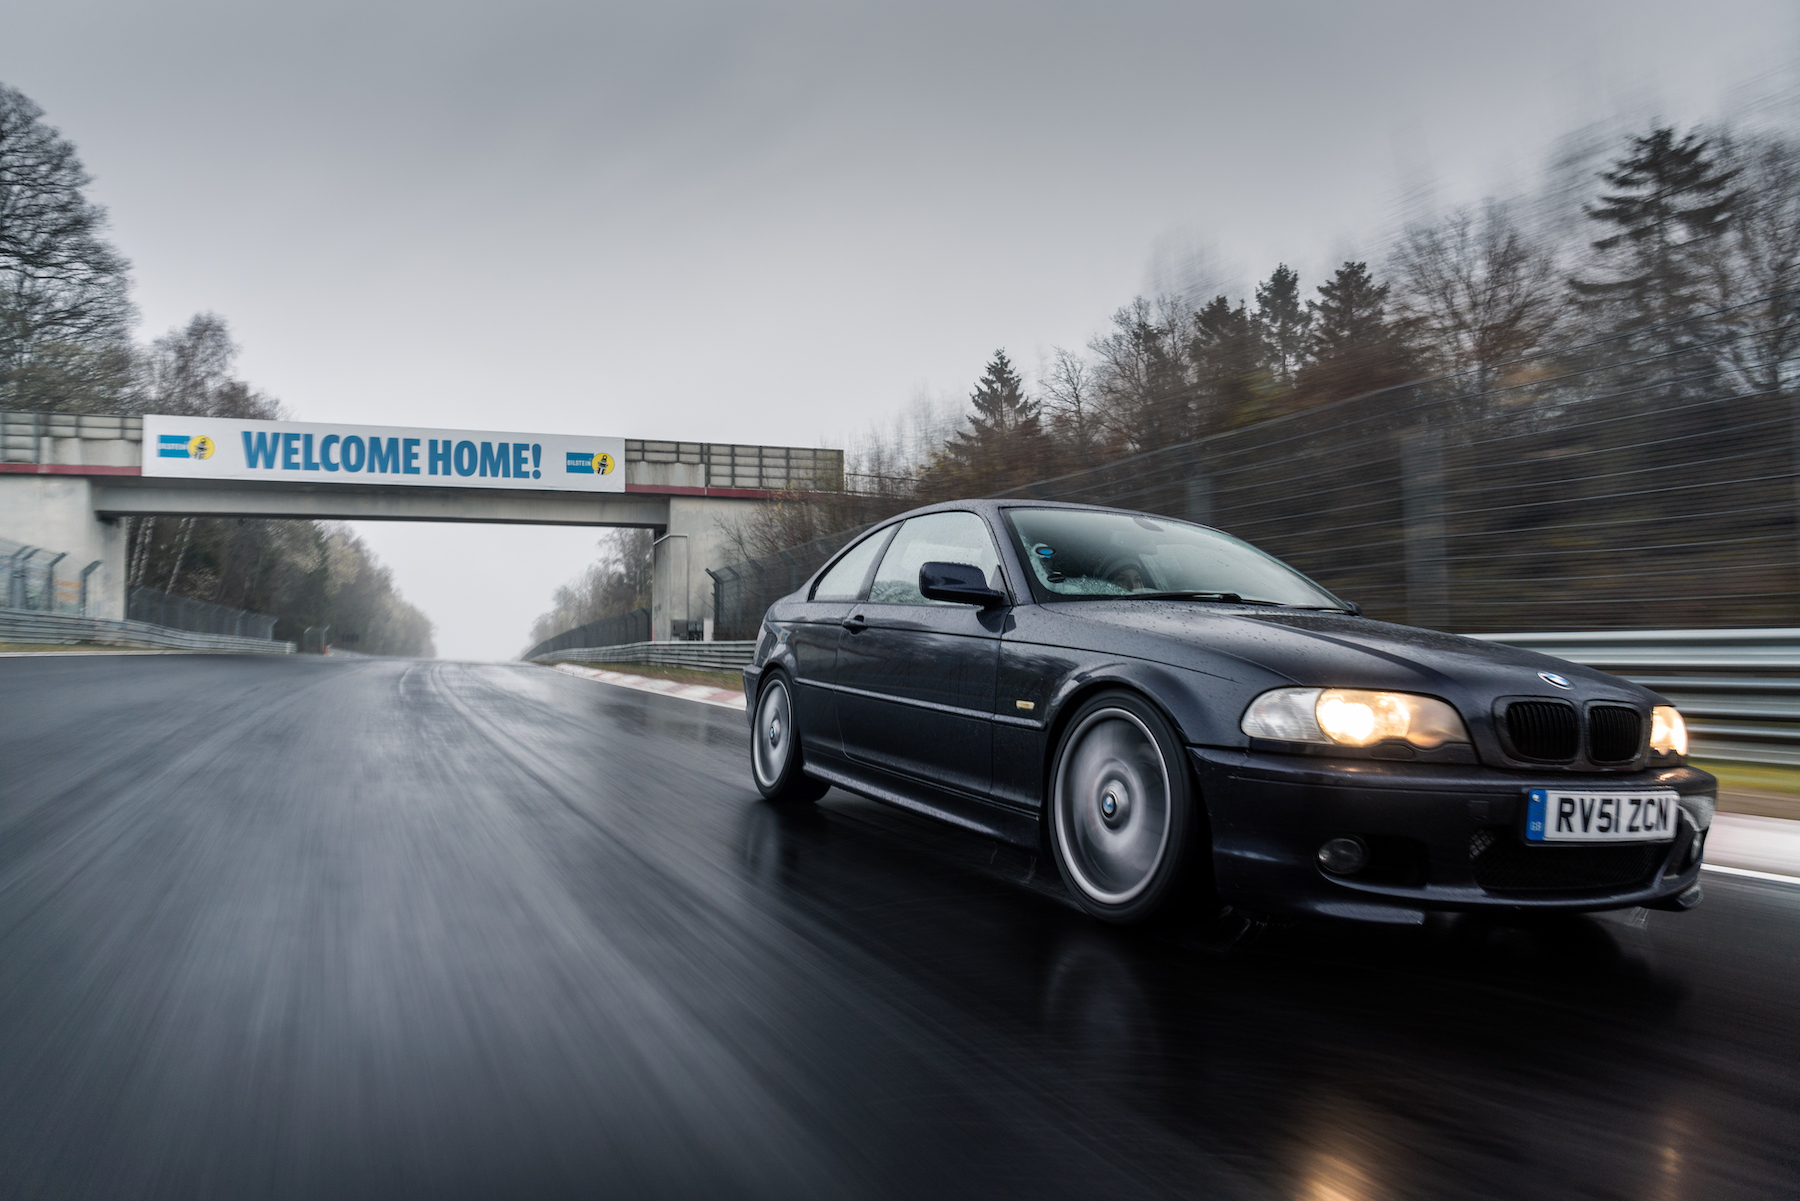 BMW E46 tuning: The perfect lowering solution with the right